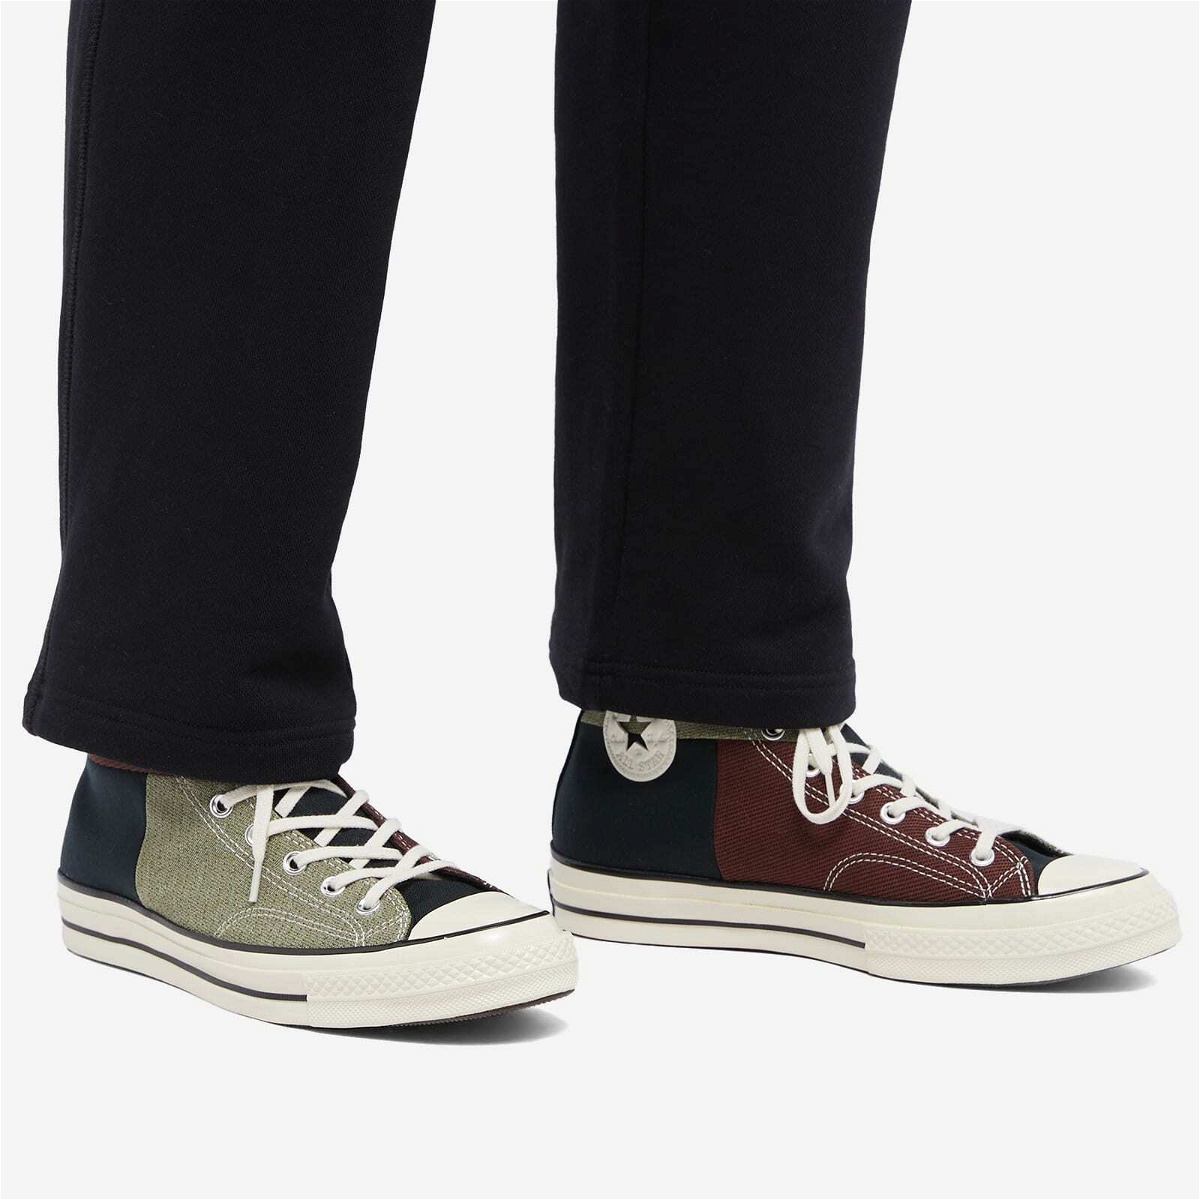 Converse Men's Chuck 70 Crafted Patchwork Sneakers in Black/Trolled ...